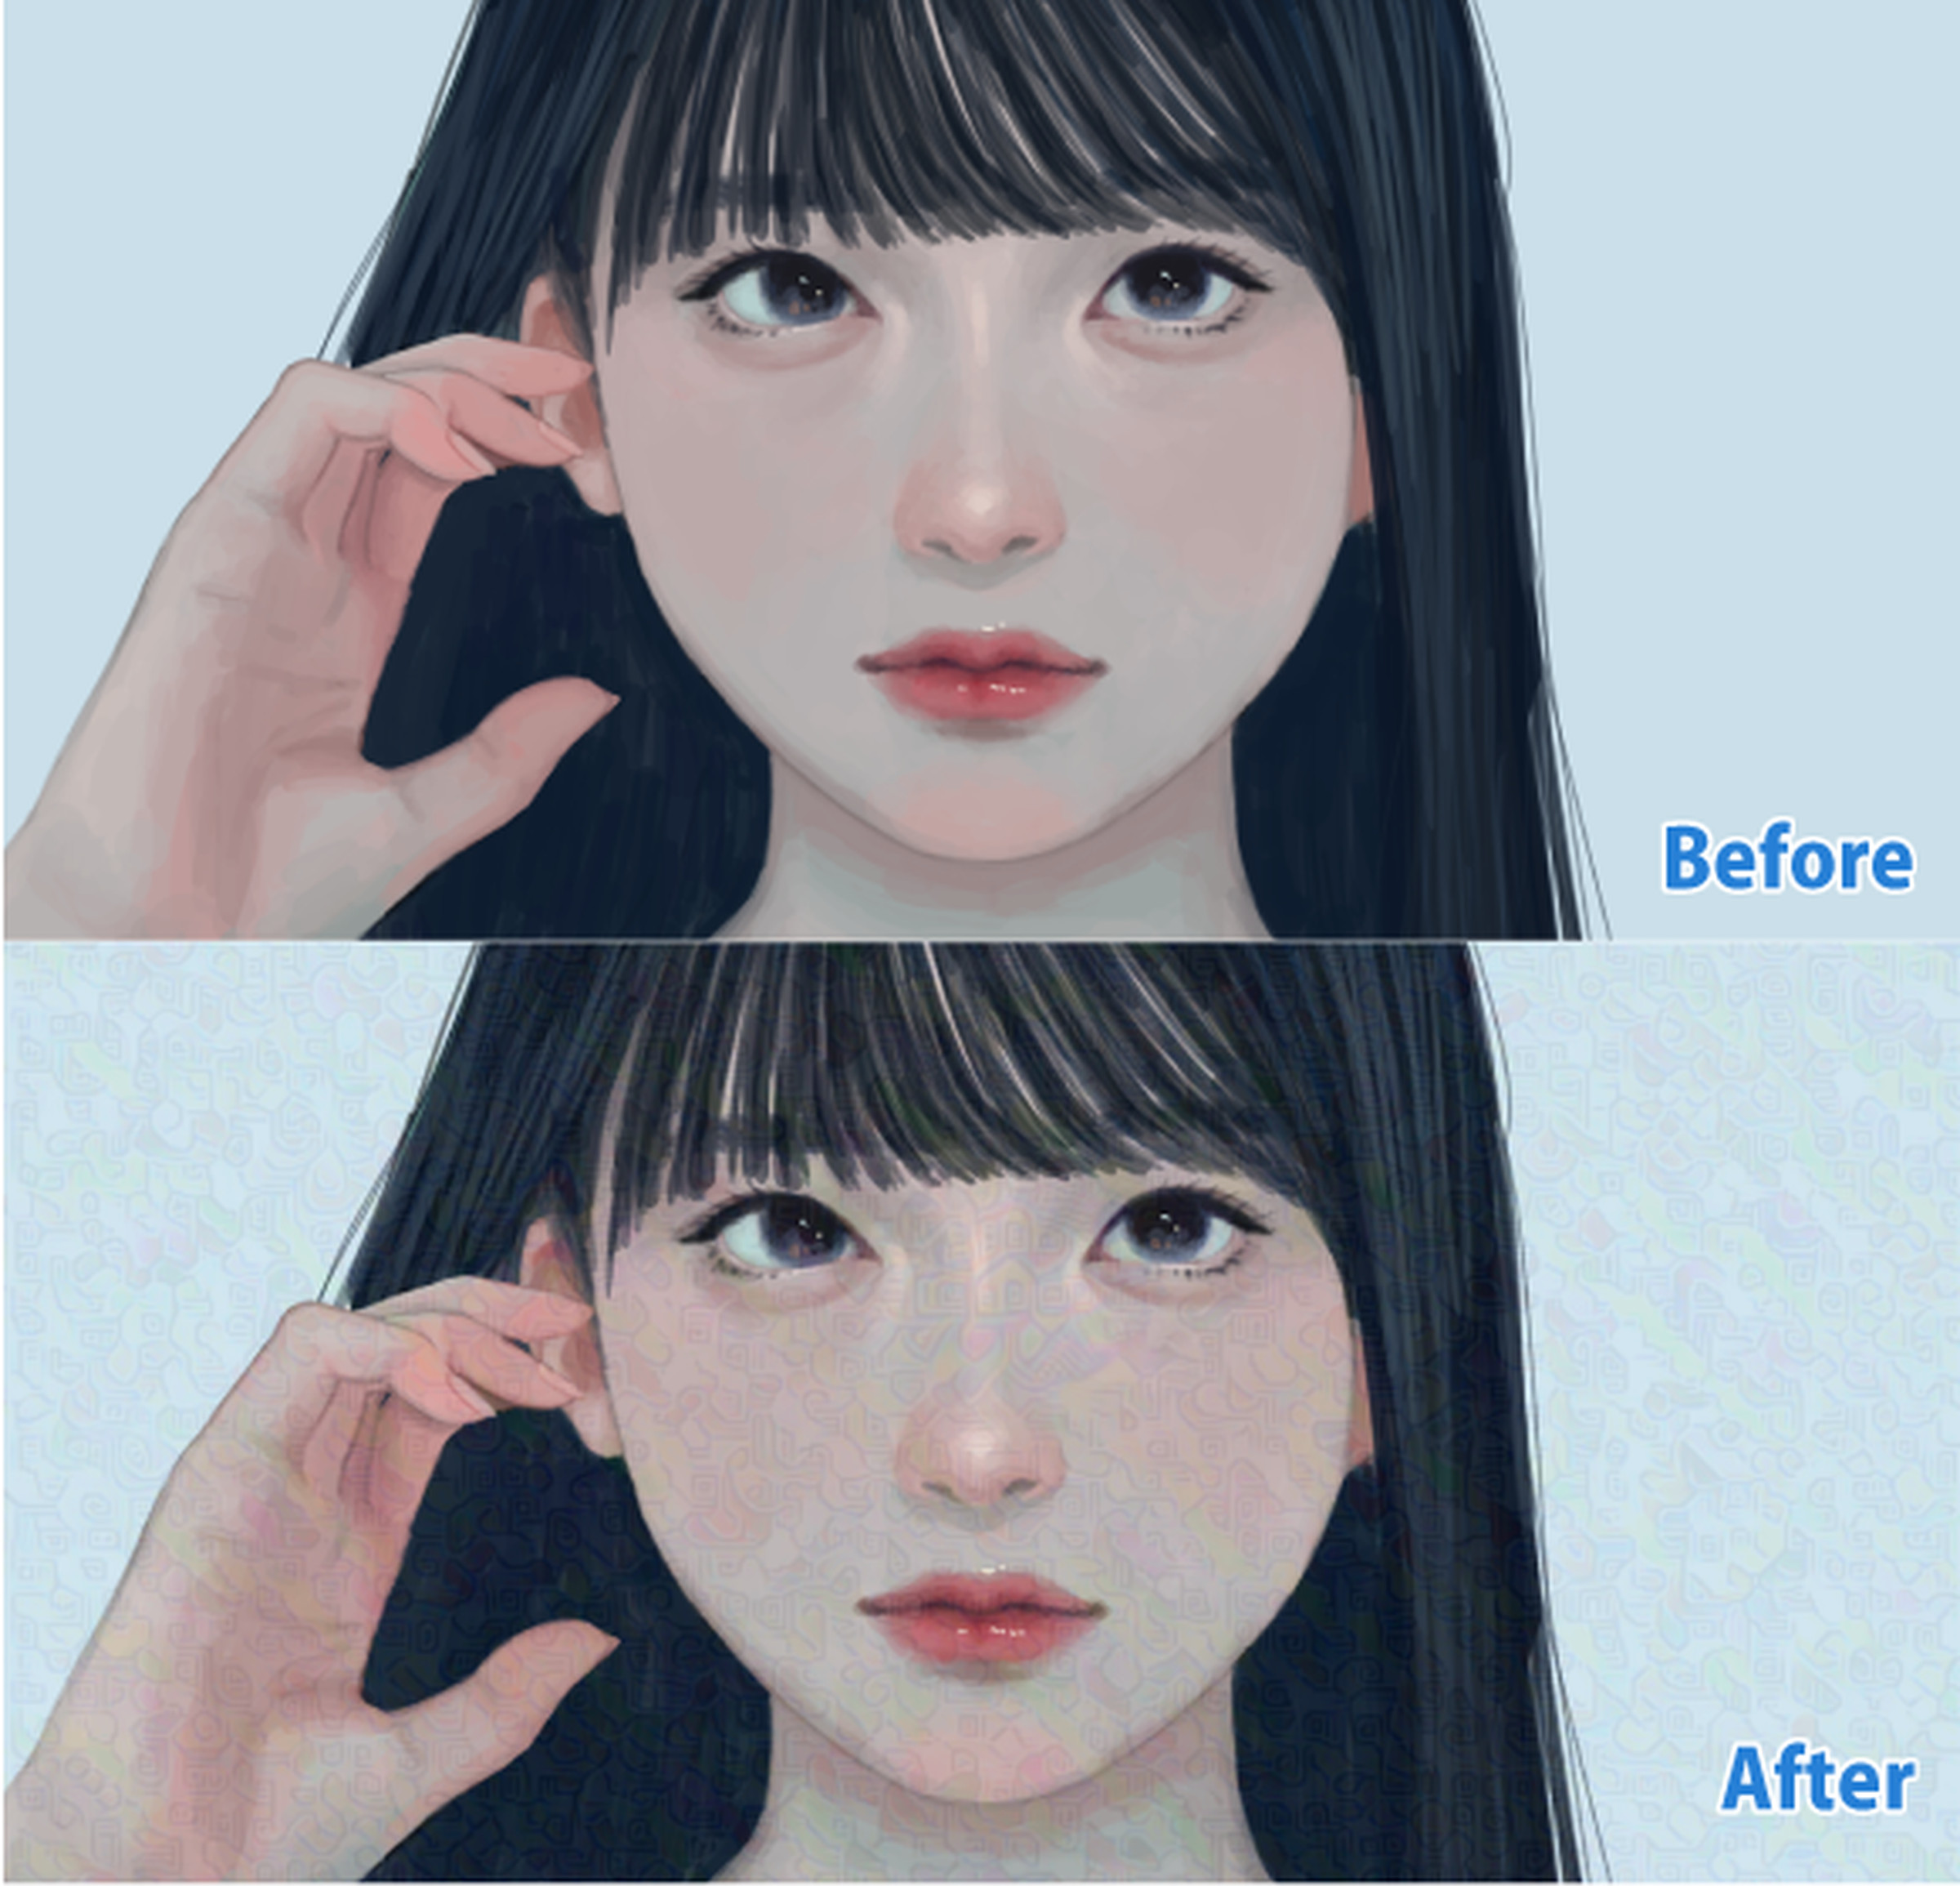 A before and after comparison of an image in IbisPaint with AI Disturbance applied.